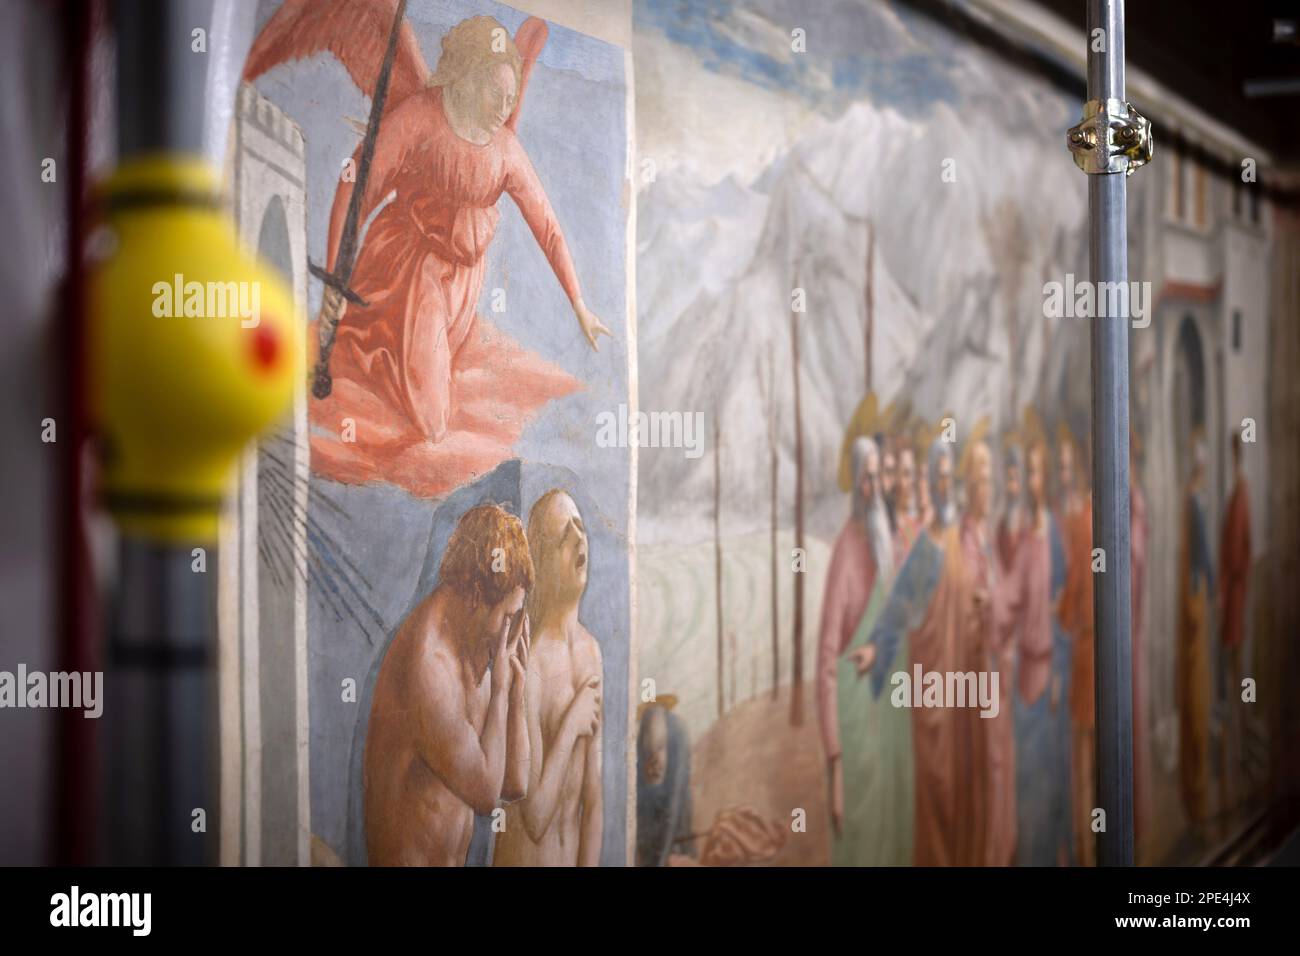 Restoration work in progress on the famous frescoes of the Branacci Chapel in Florence. Small time limited tours allowed amidst the scaffolding Stock Photo